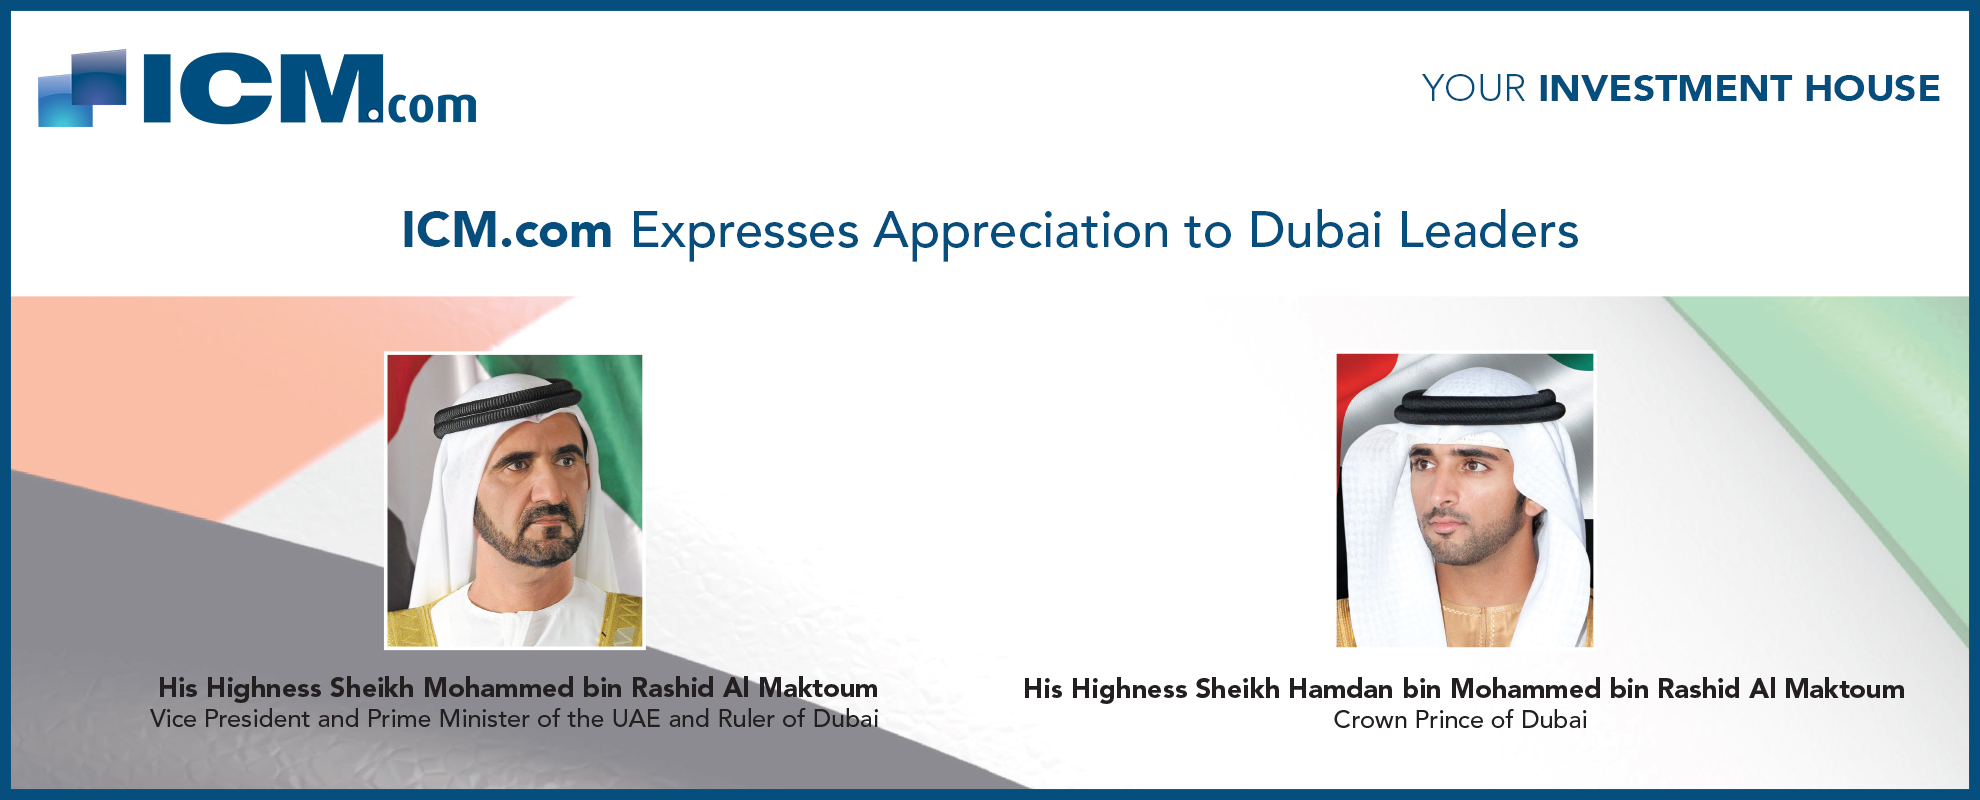 Banner with photos of PM & price of Dubai with text Express Appriciation To Dubai Leaders